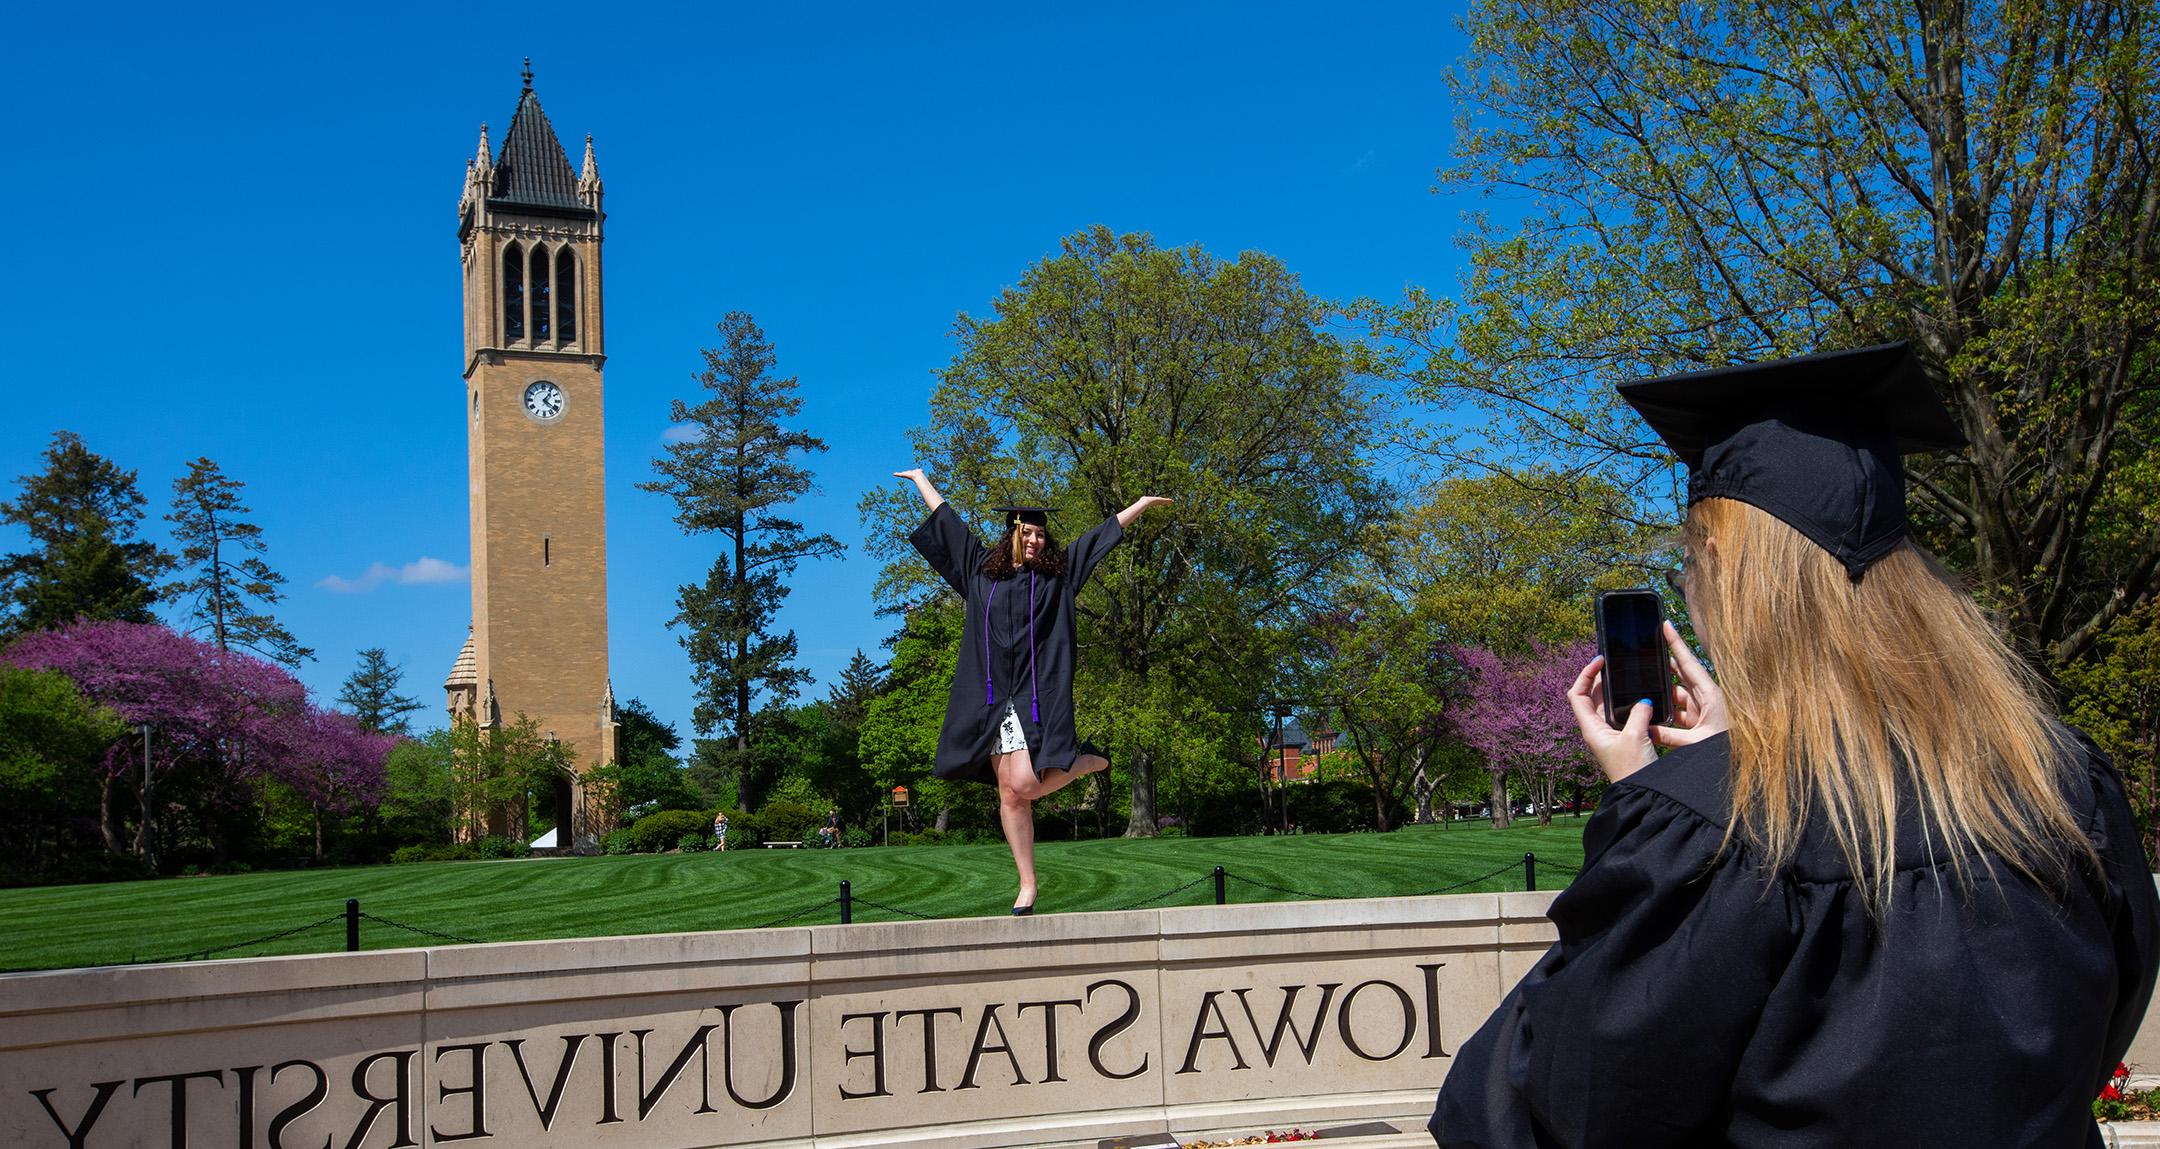 A graduate takes a picture of another graduate on the Iowa State University wall in front of the campanile